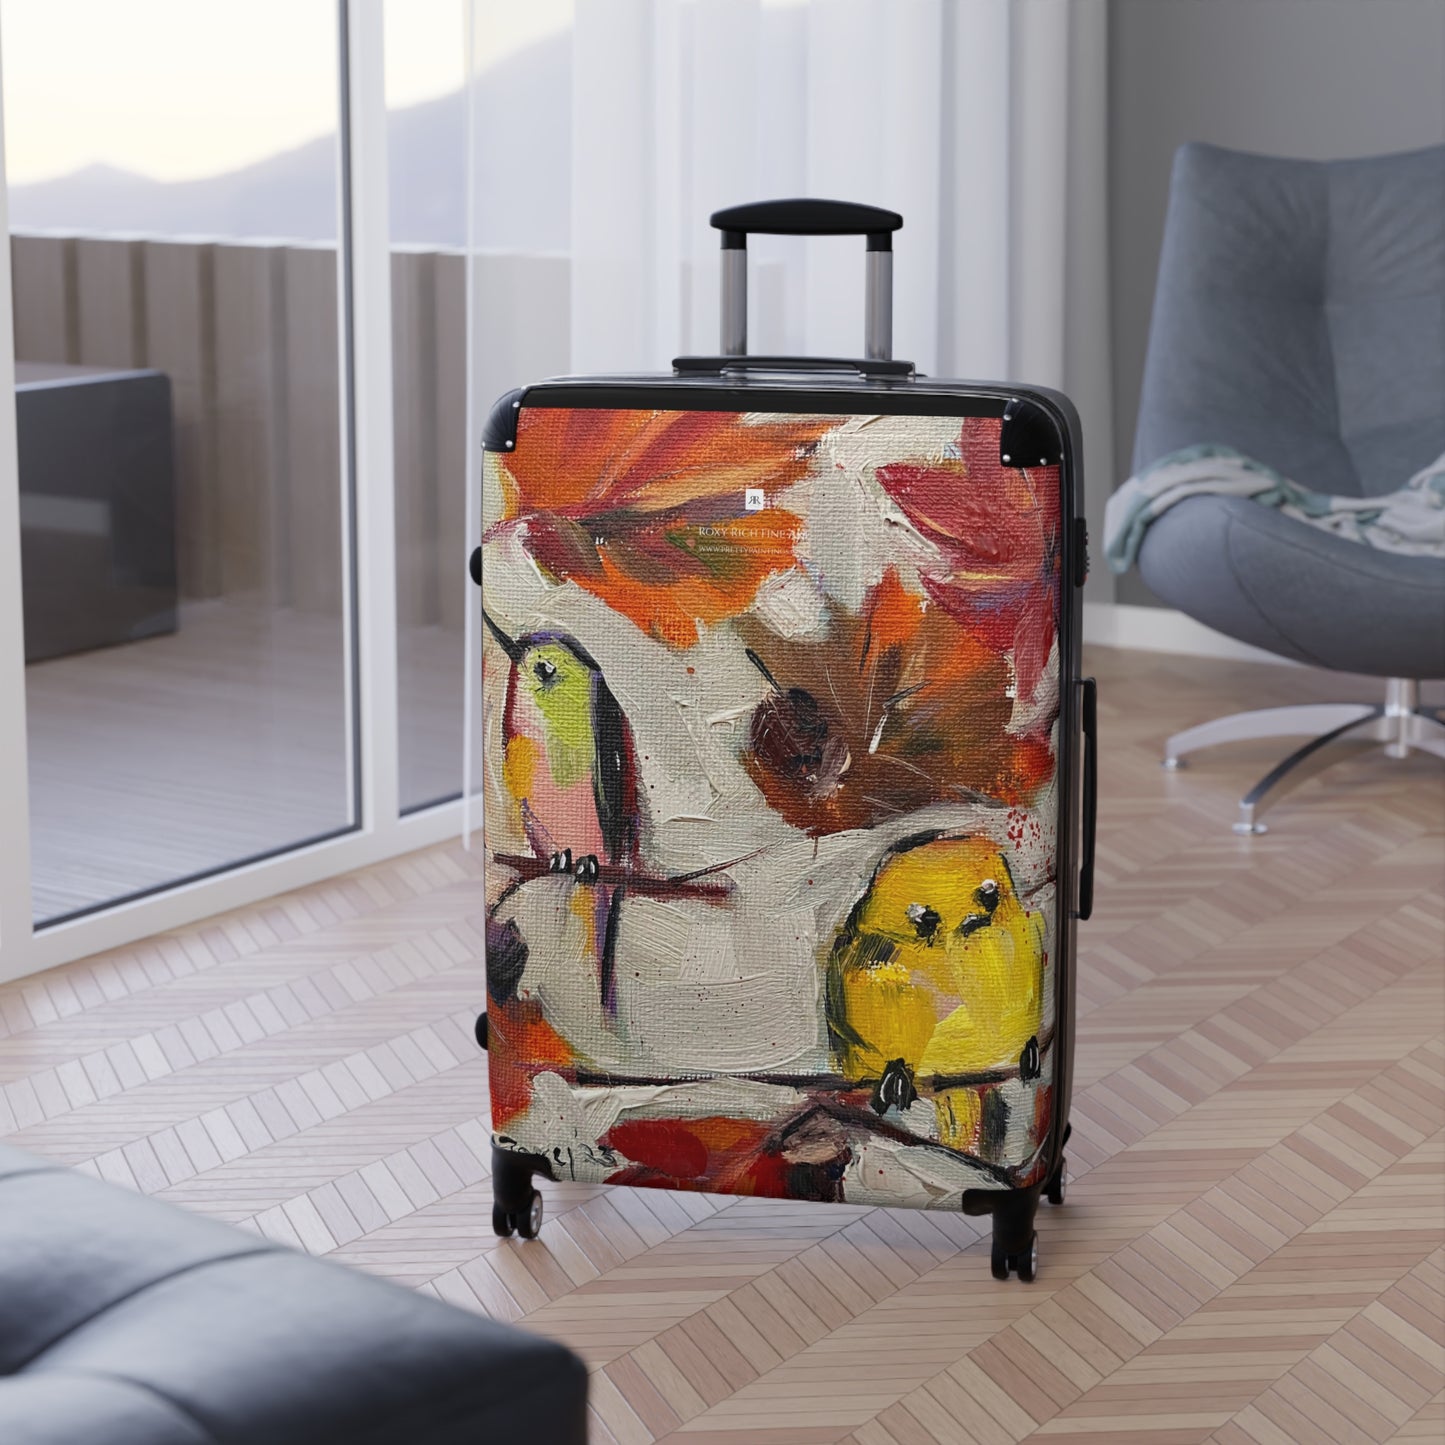 Fall Feathers Carry on Suitcase